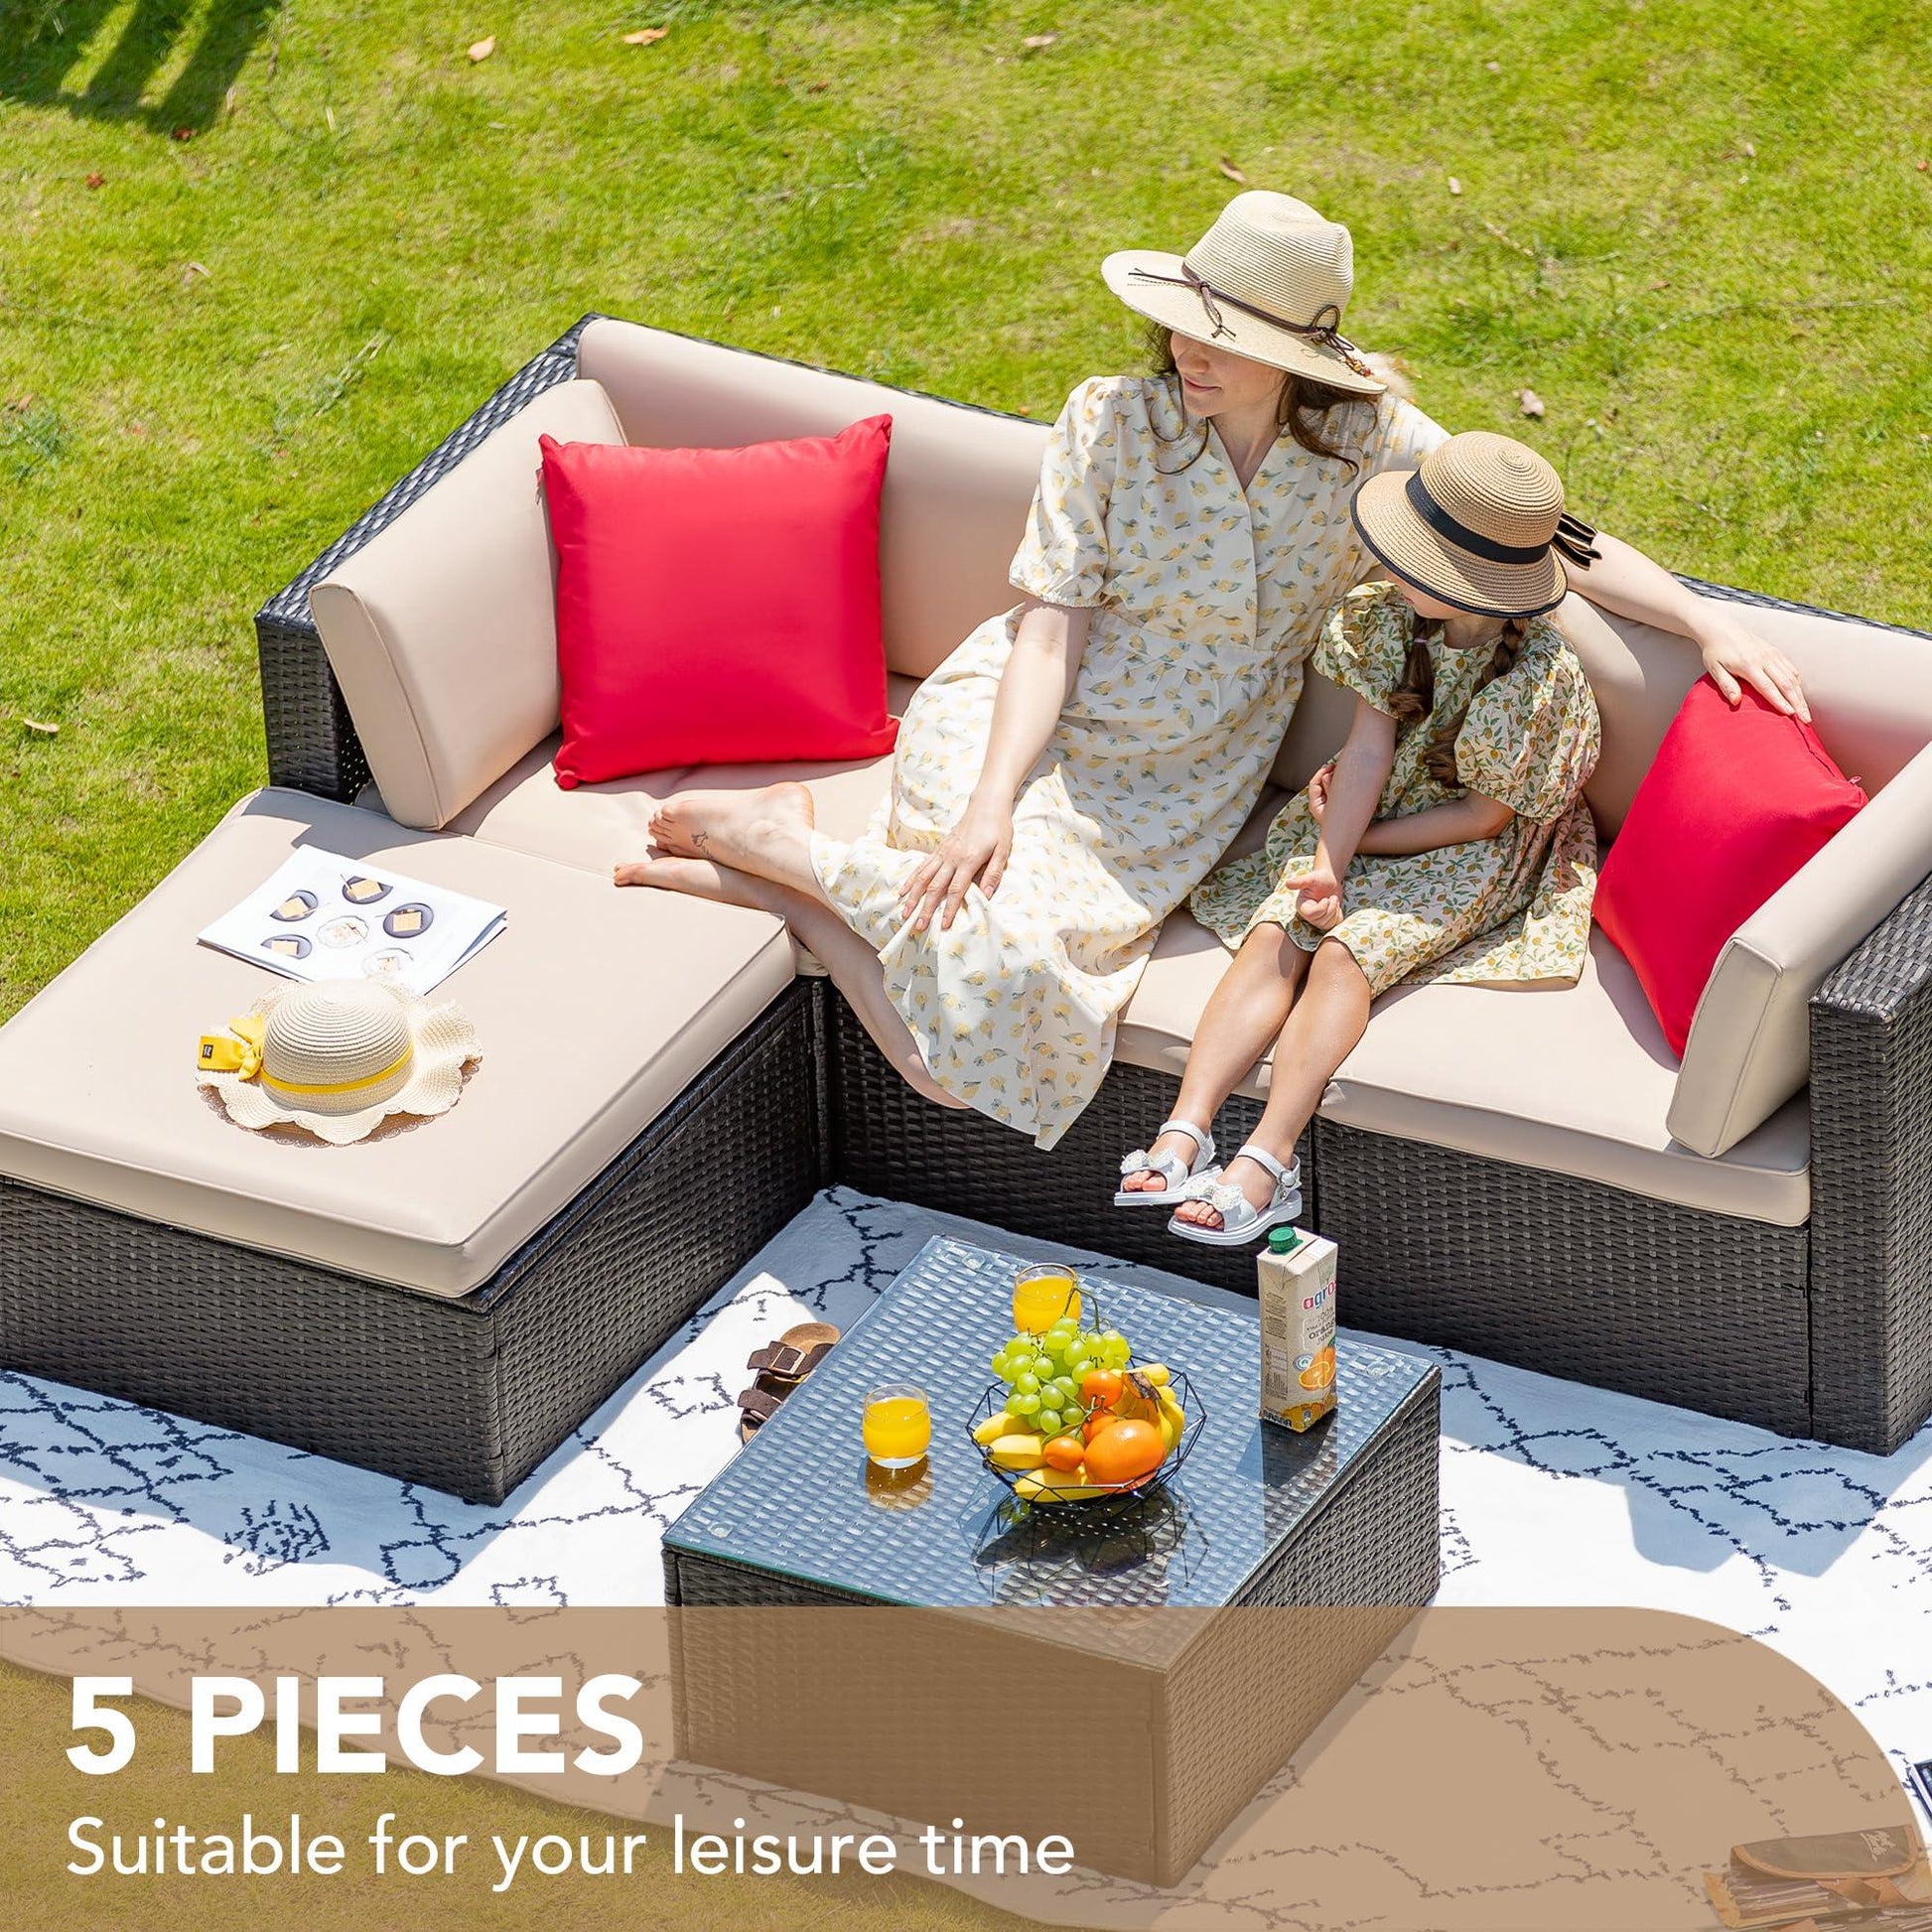 Devoko 5 Pieces Patio Furniture Sets All Weather Outdoor Sectional Patio Sofa Manual Weaving Wicker Rattan Patio Seating Sofas with Cushion and Glass Table(Beige) - CookCave